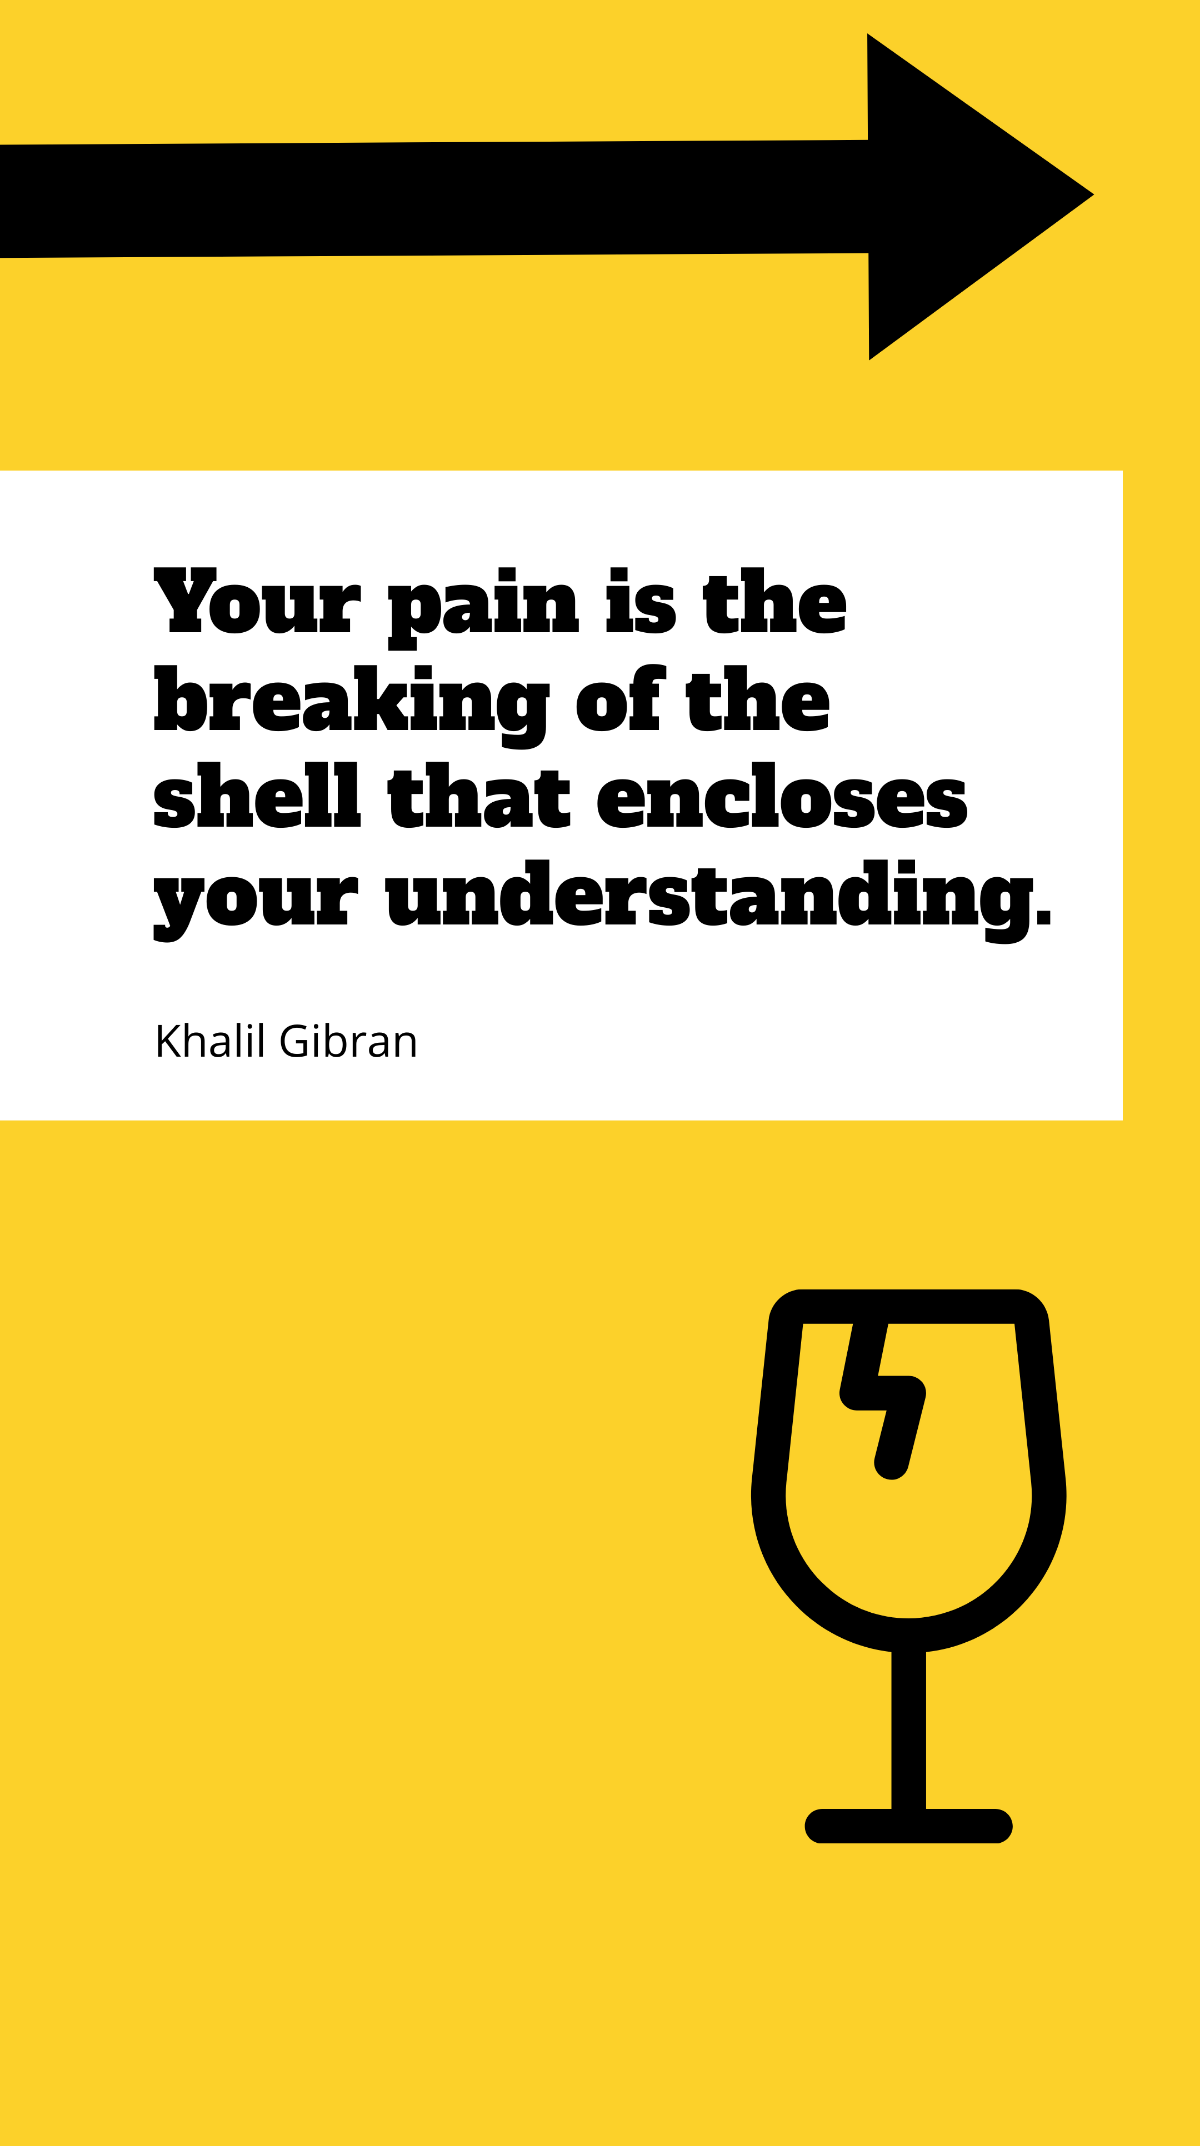 Khalil Gibran - Your pain is the breaking of the shell that encloses your understanding. Template